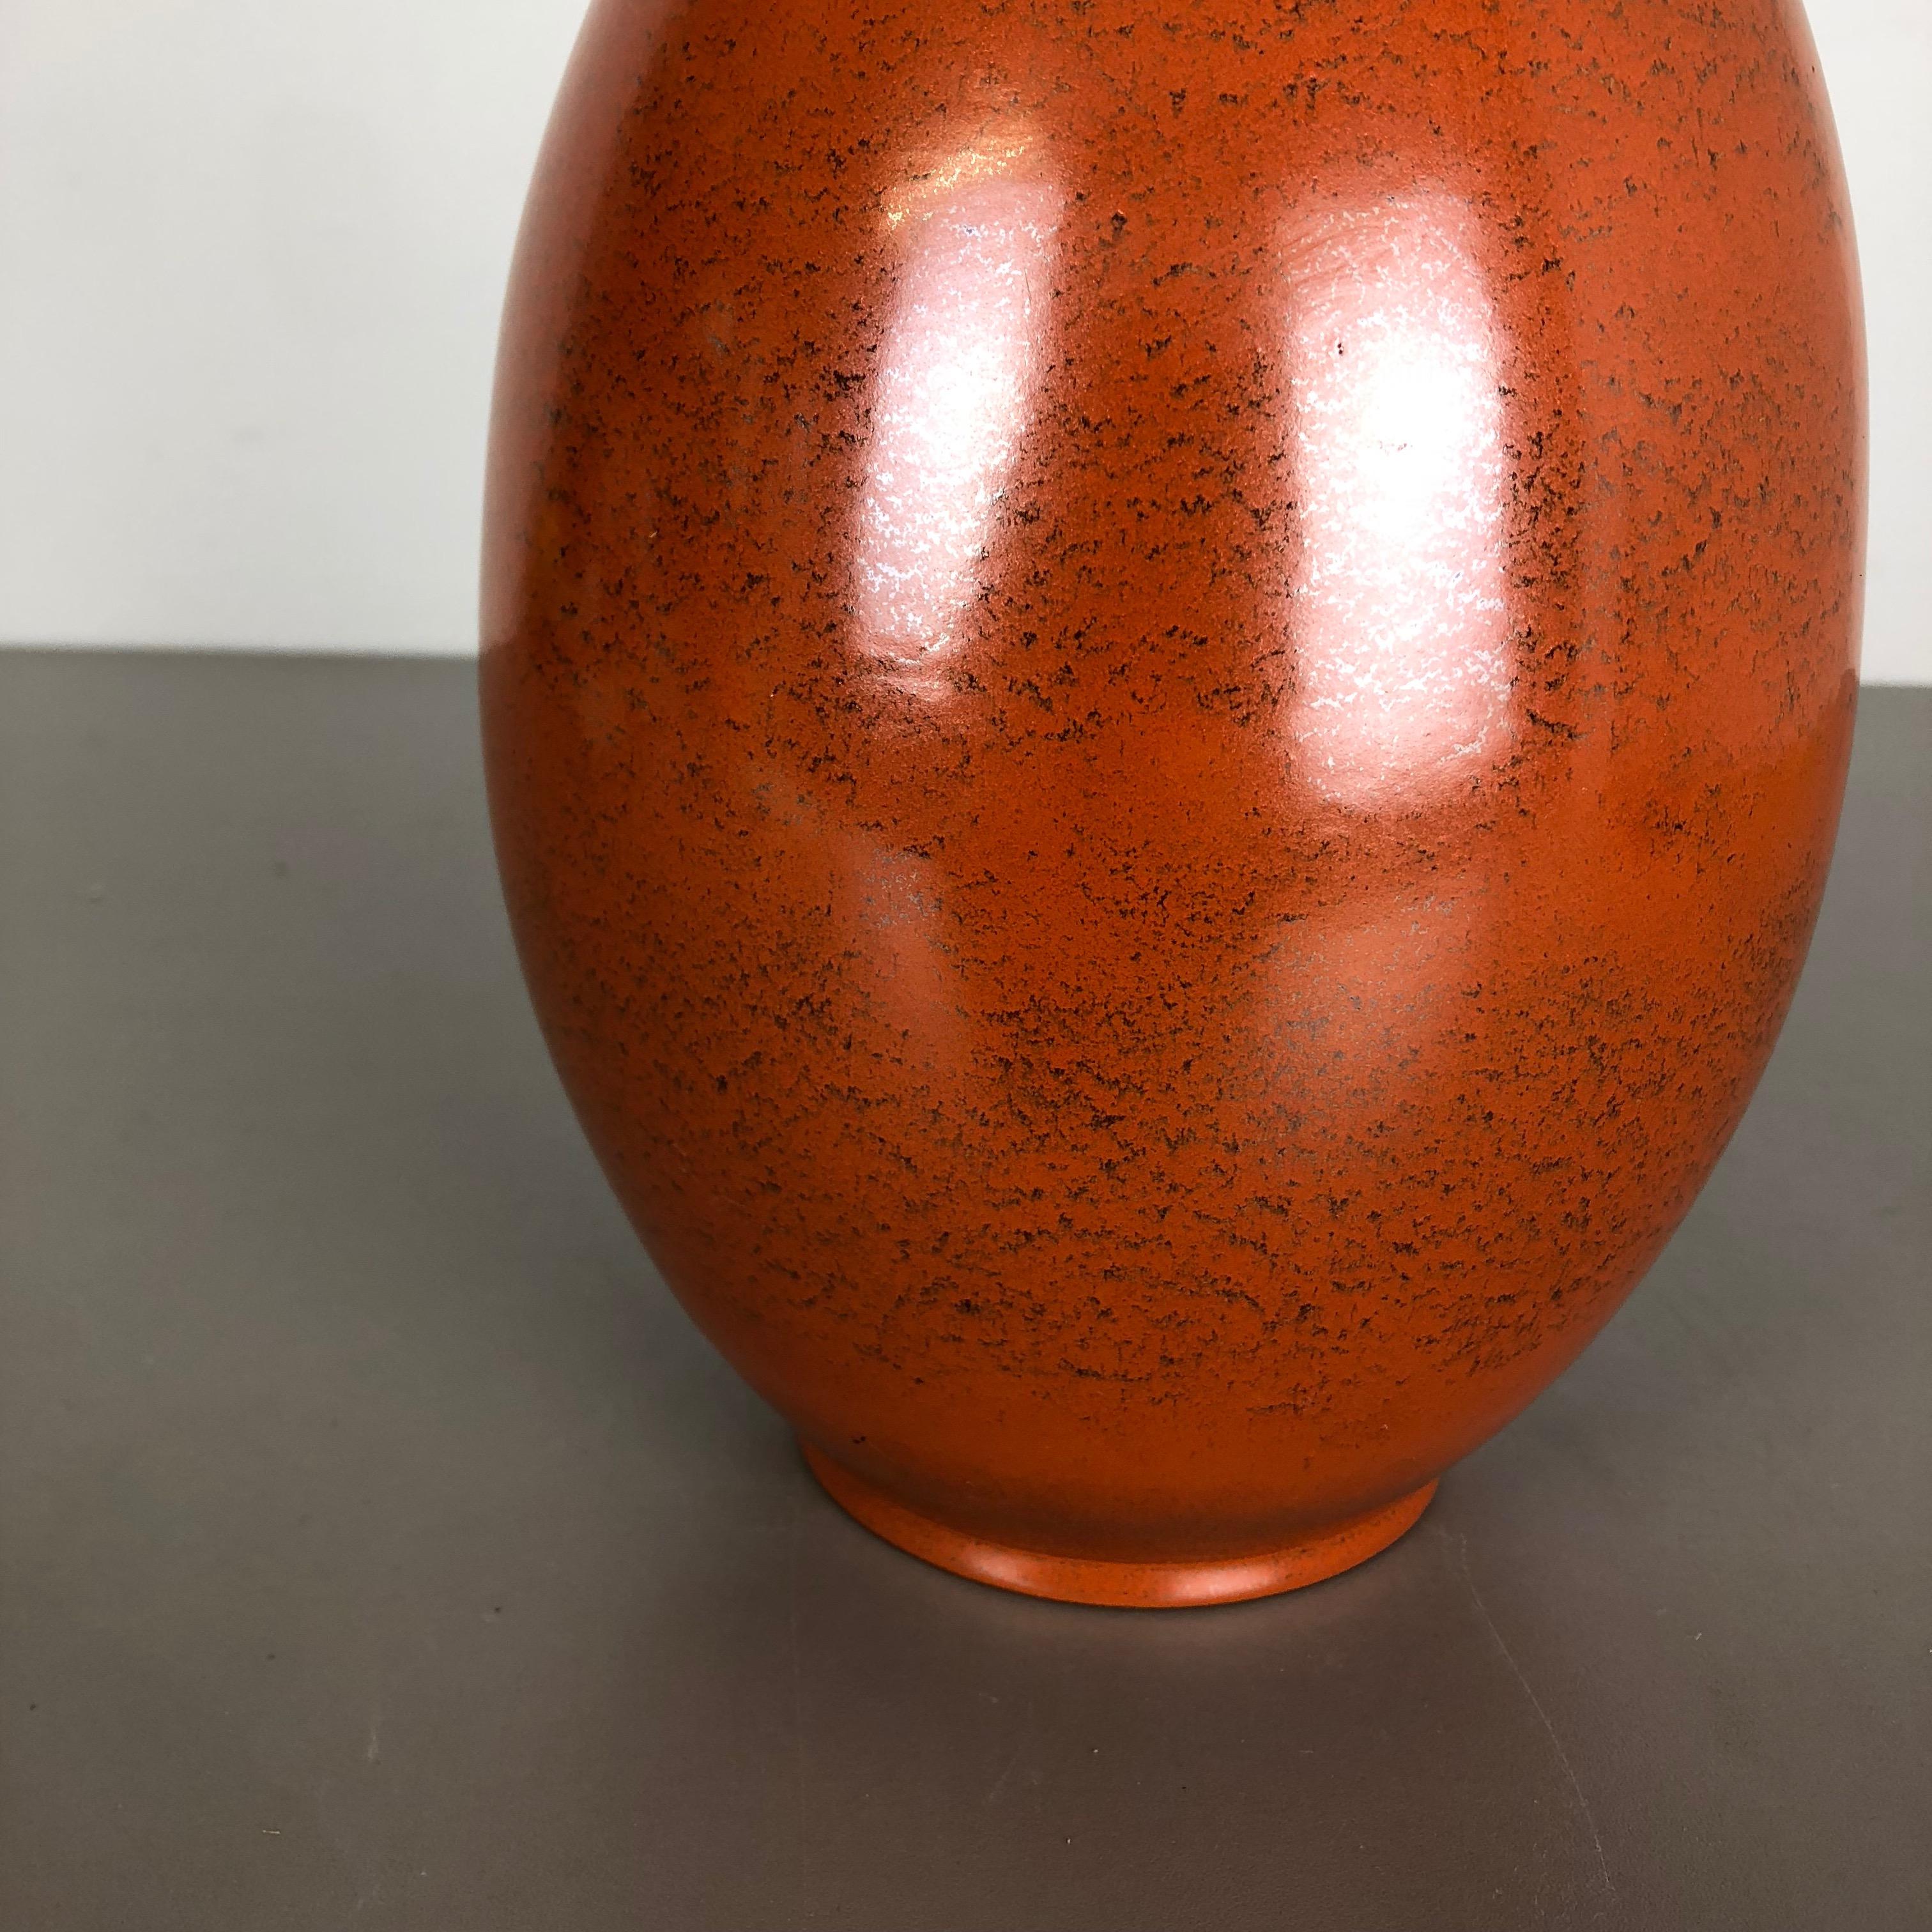 Large Abstract Ceramic Pottery Vase by Dümmler and Breiden, Germany, 1950s For Sale 1